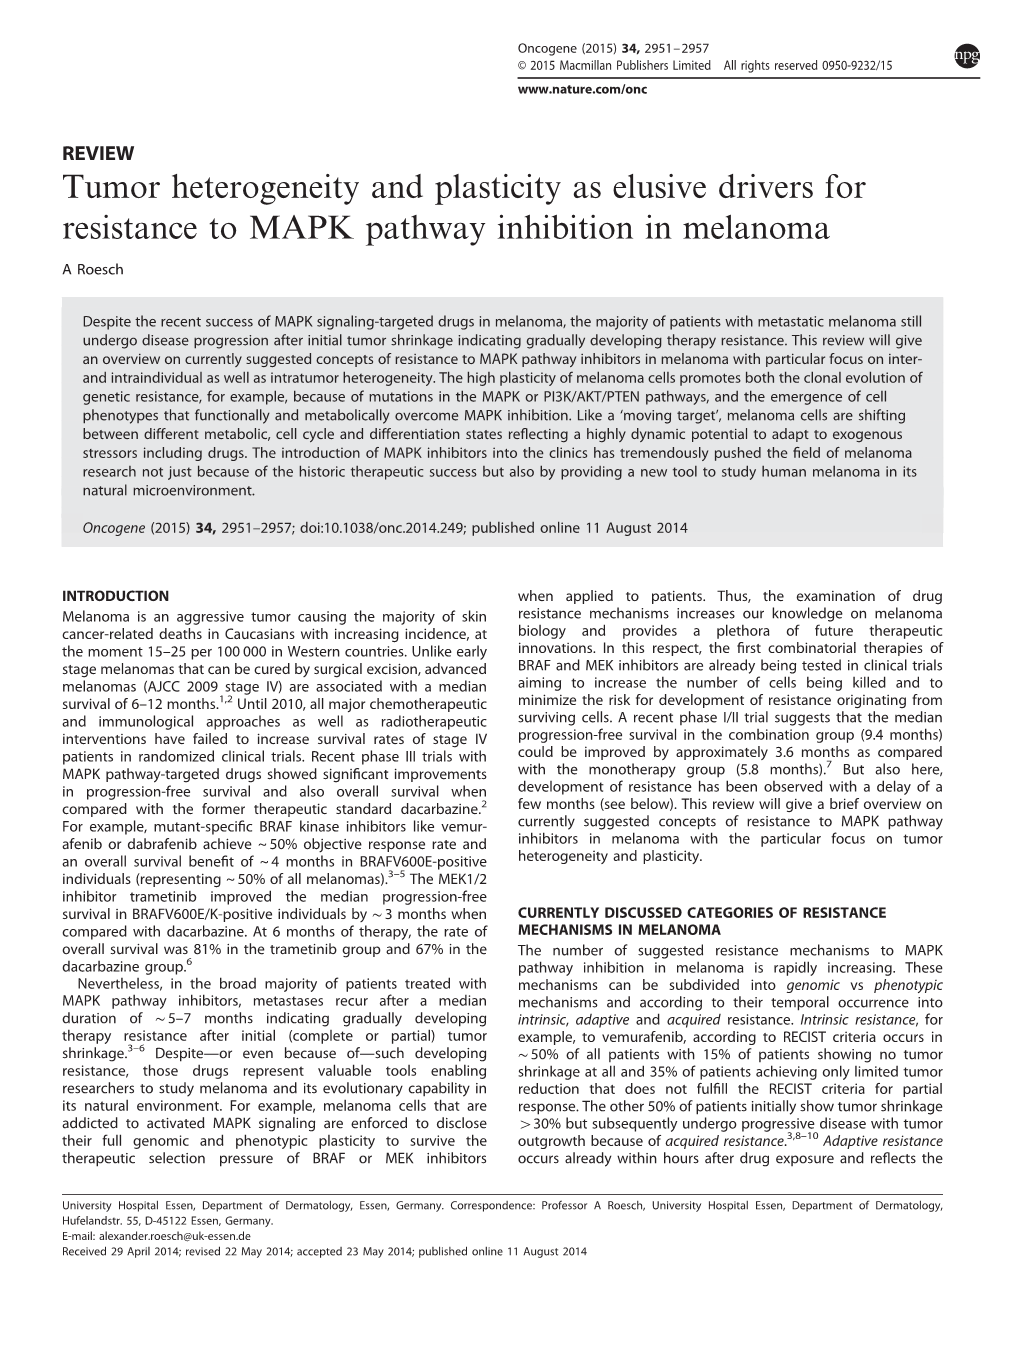 Tumor Heterogeneity and Plasticity As Elusive Drivers for Resistance to MAPK Pathway Inhibition in Melanoma